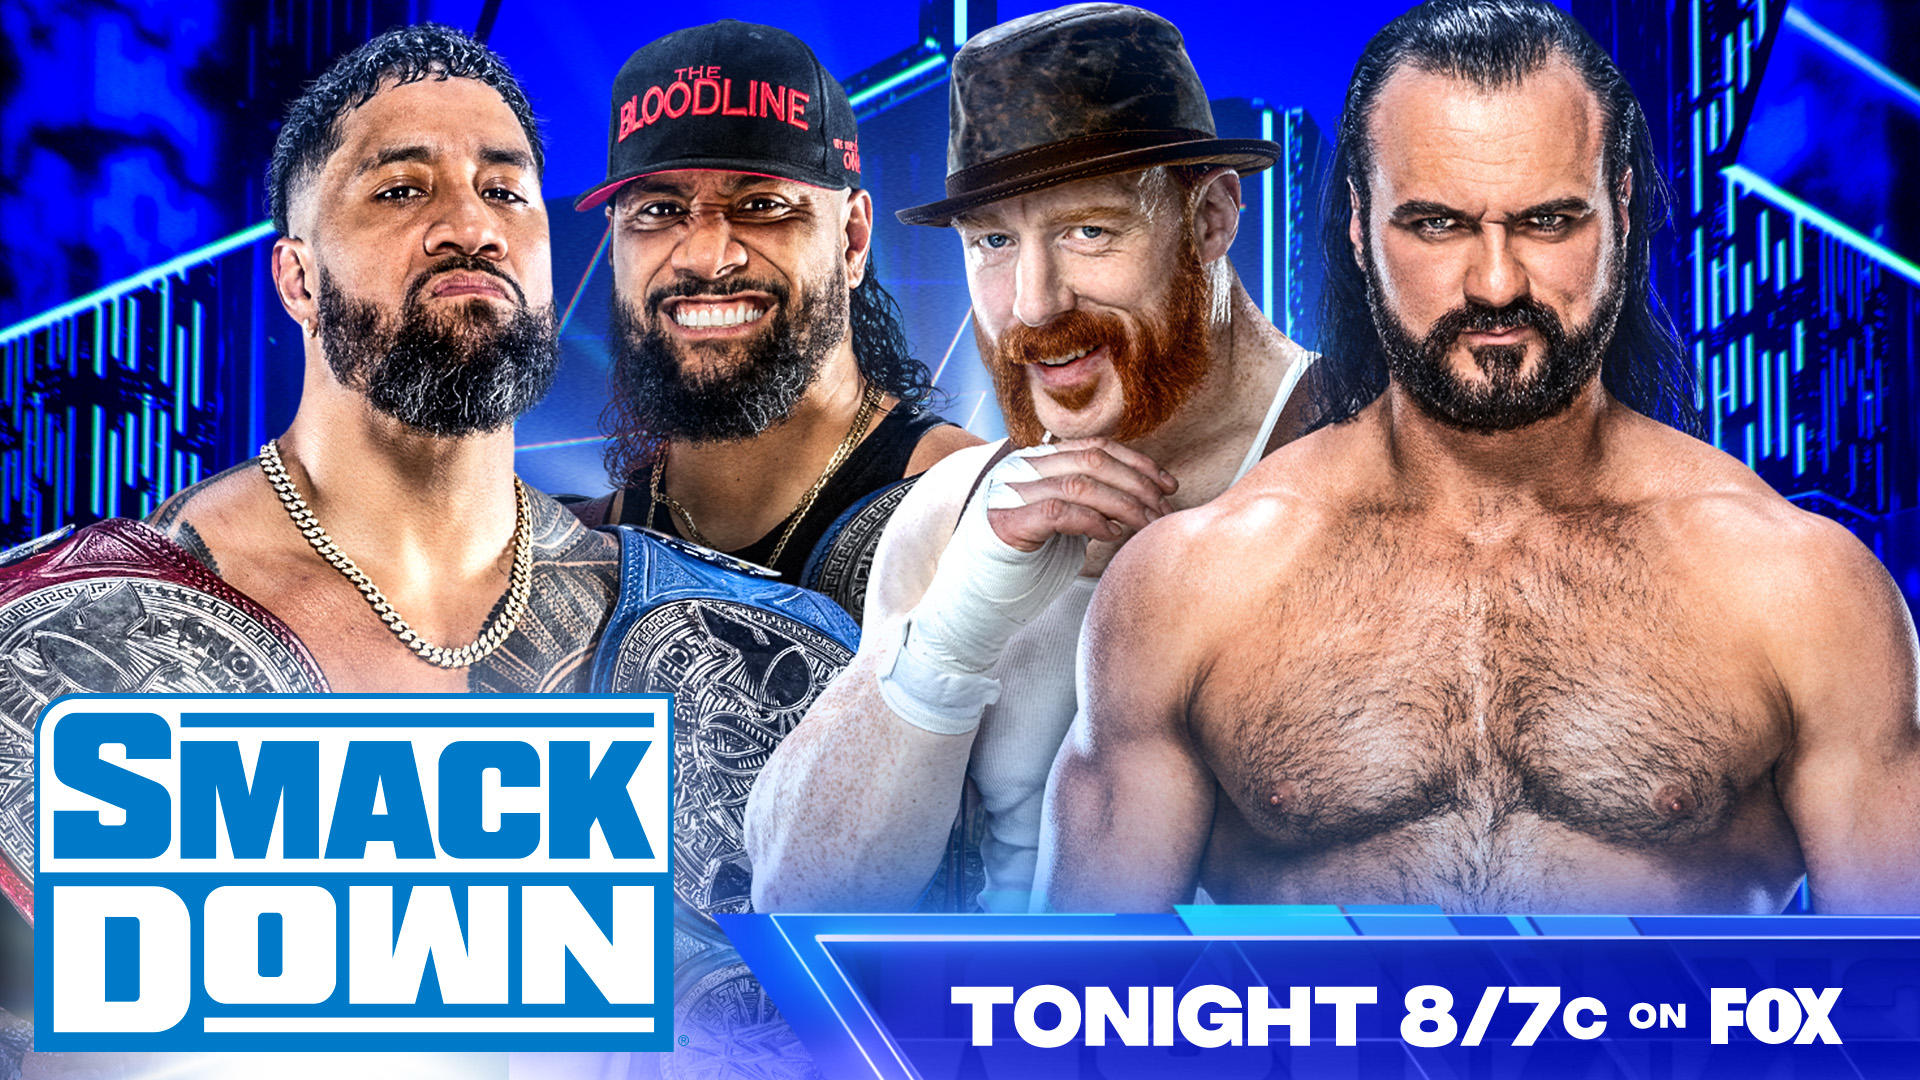 WWE SmackDown preview, full card: January 6, 2023